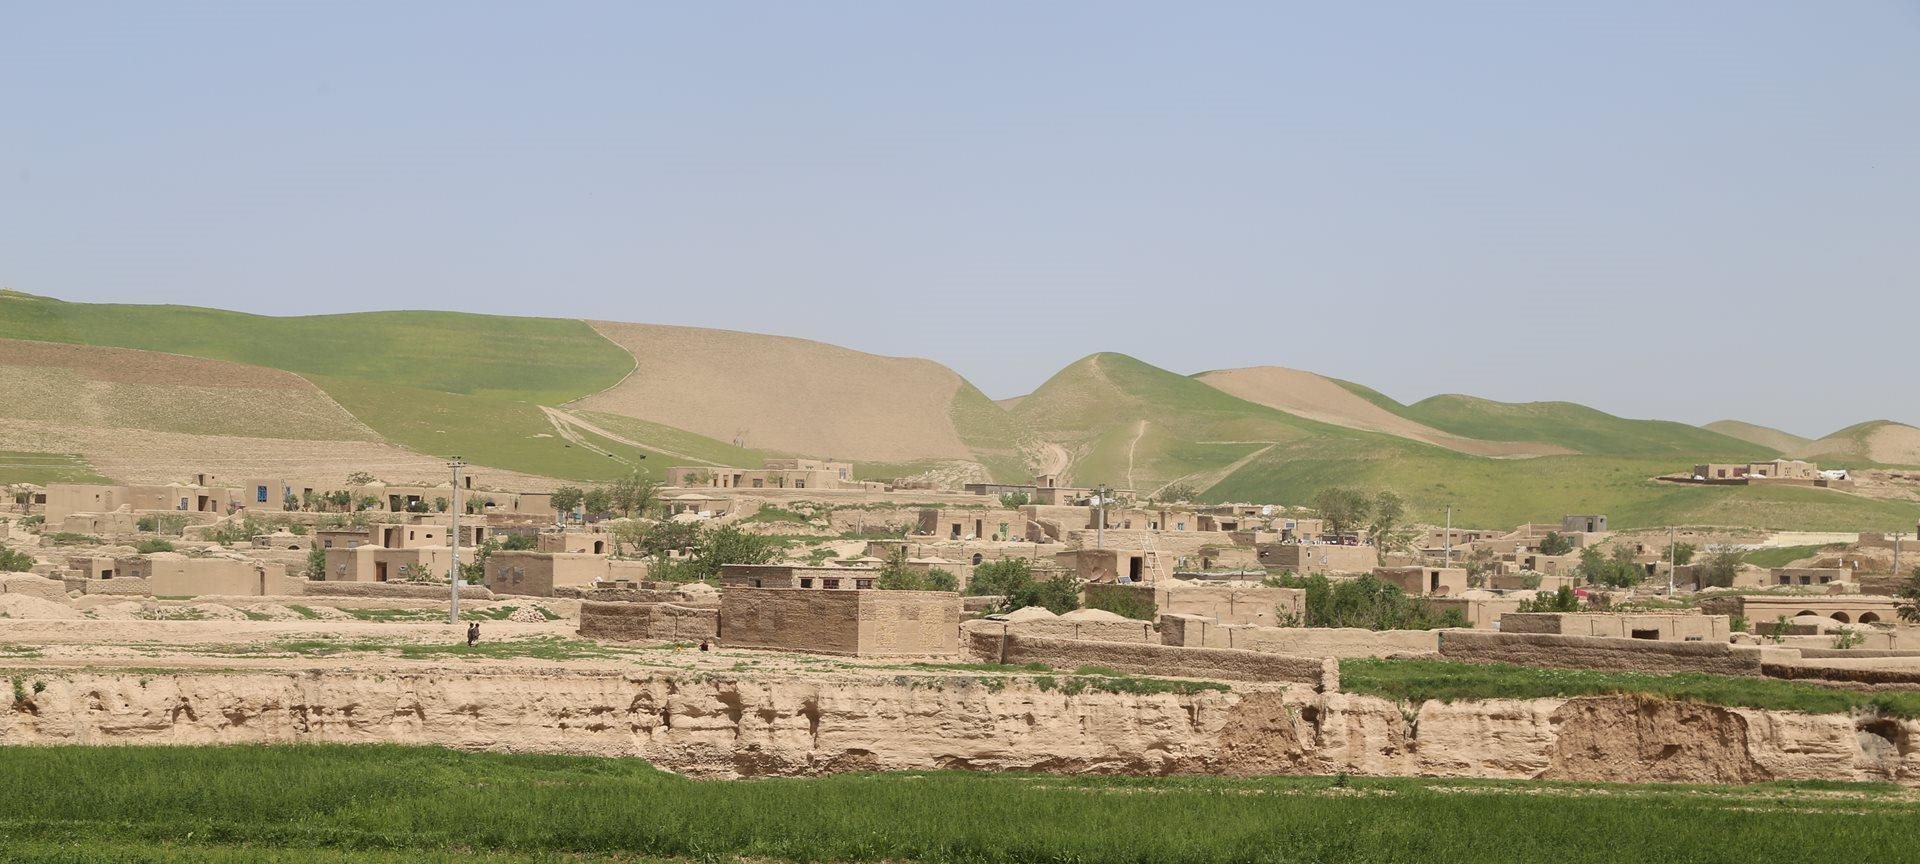 Landscape and clay houses in Afghanistan.